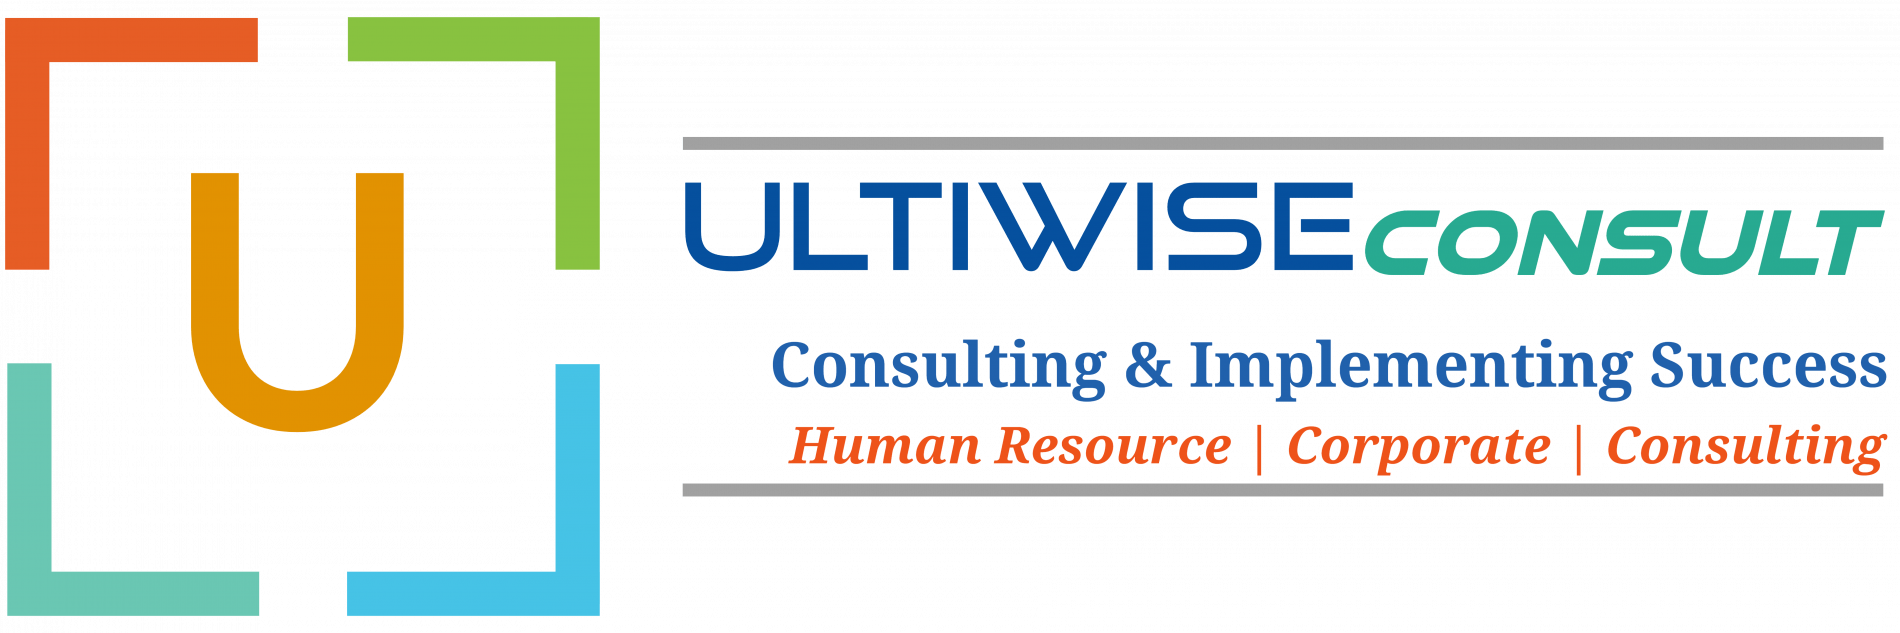 Ultiwise Consult